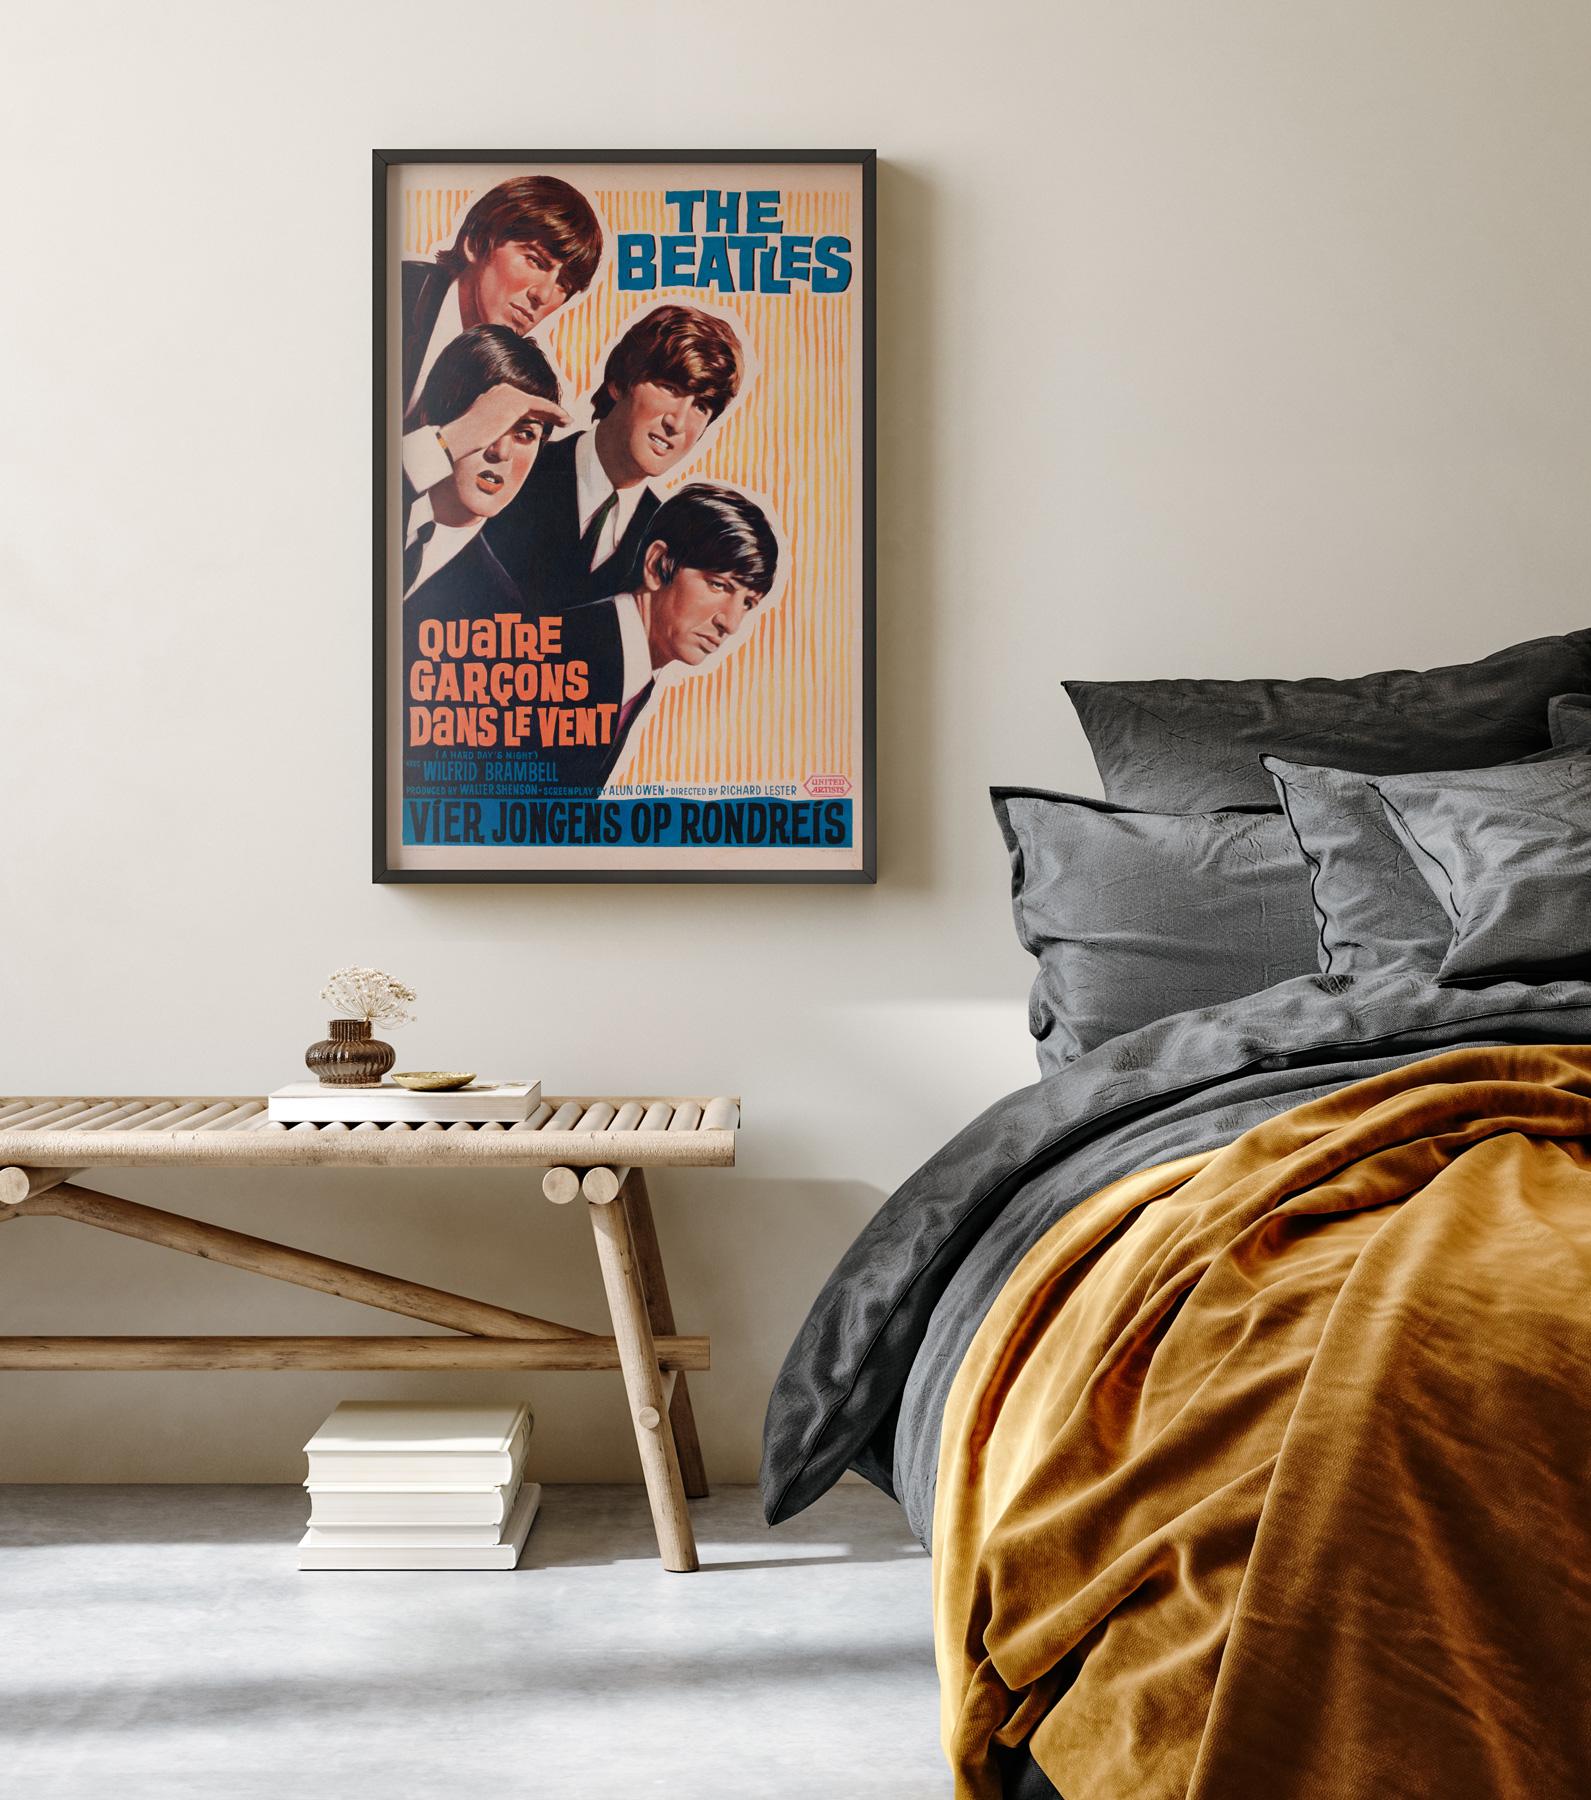 Original first-year-of-release Belgian film poster for the Beatles rock & roll classic A Hard Day’s Night. Quite typical of Belgian posters, it features a unique design than other posters for the film with a lovely illustration of the Fab Four. Do